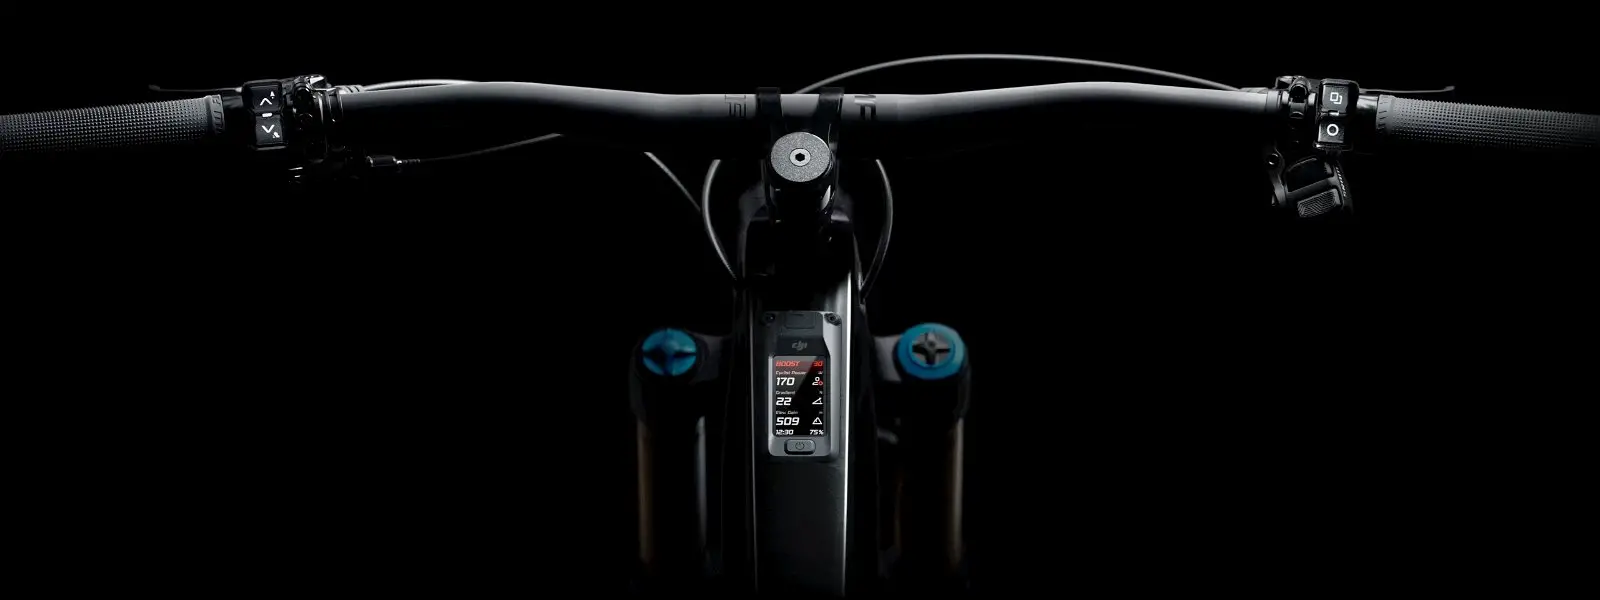 DJI Amflow PL: this is the first electric bike from the drone company